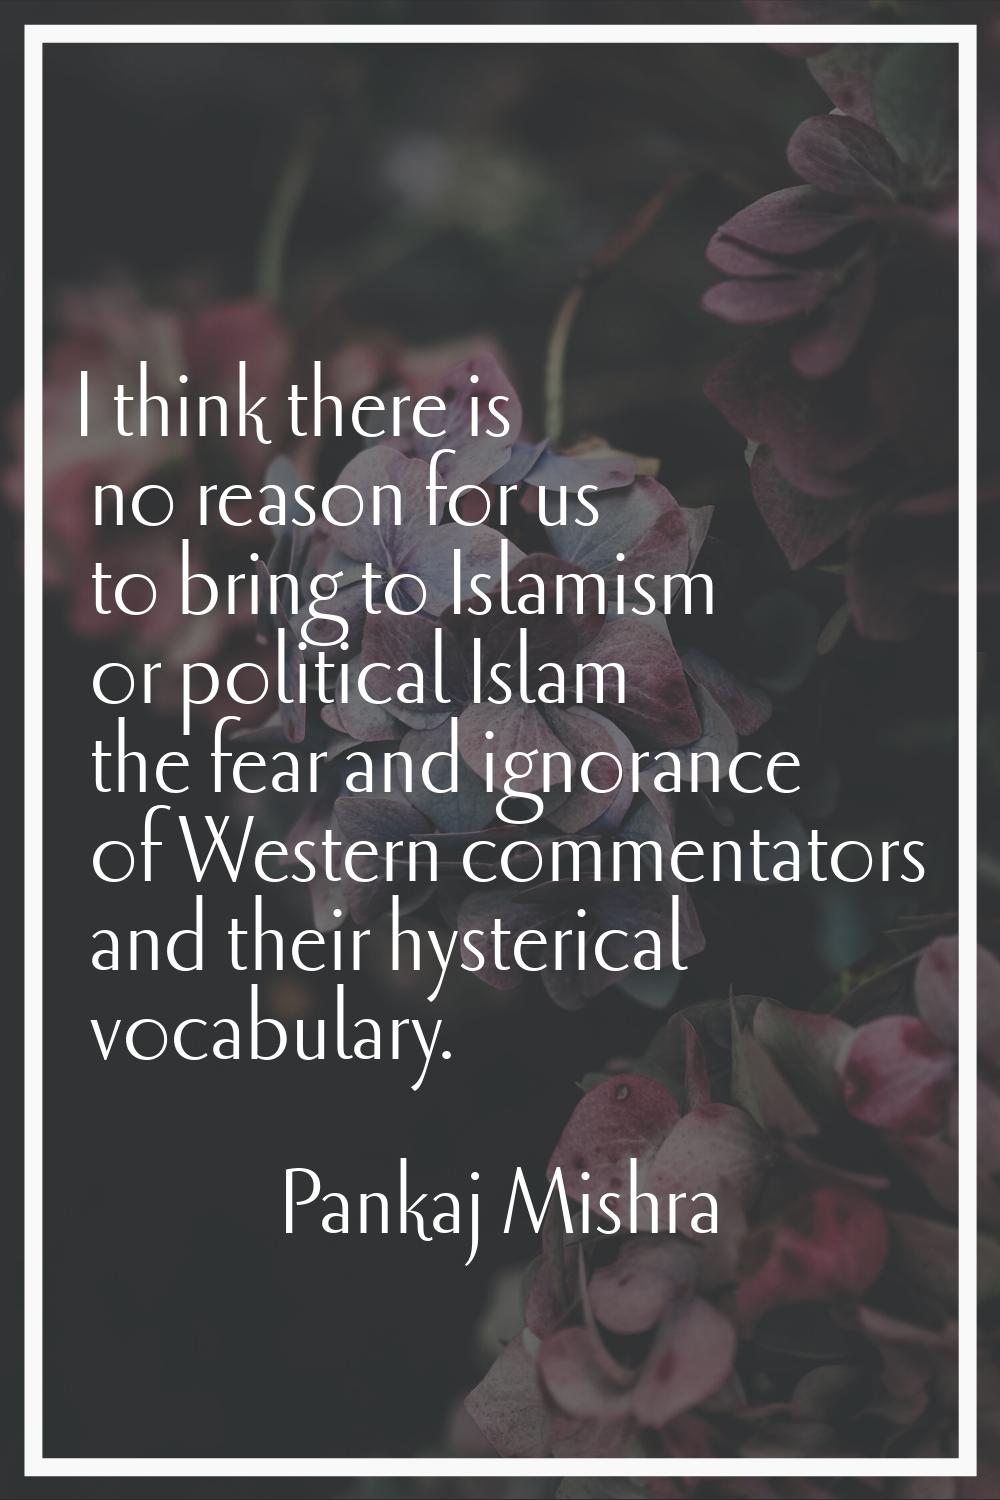 I think there is no reason for us to bring to Islamism or political Islam the fear and ignorance of